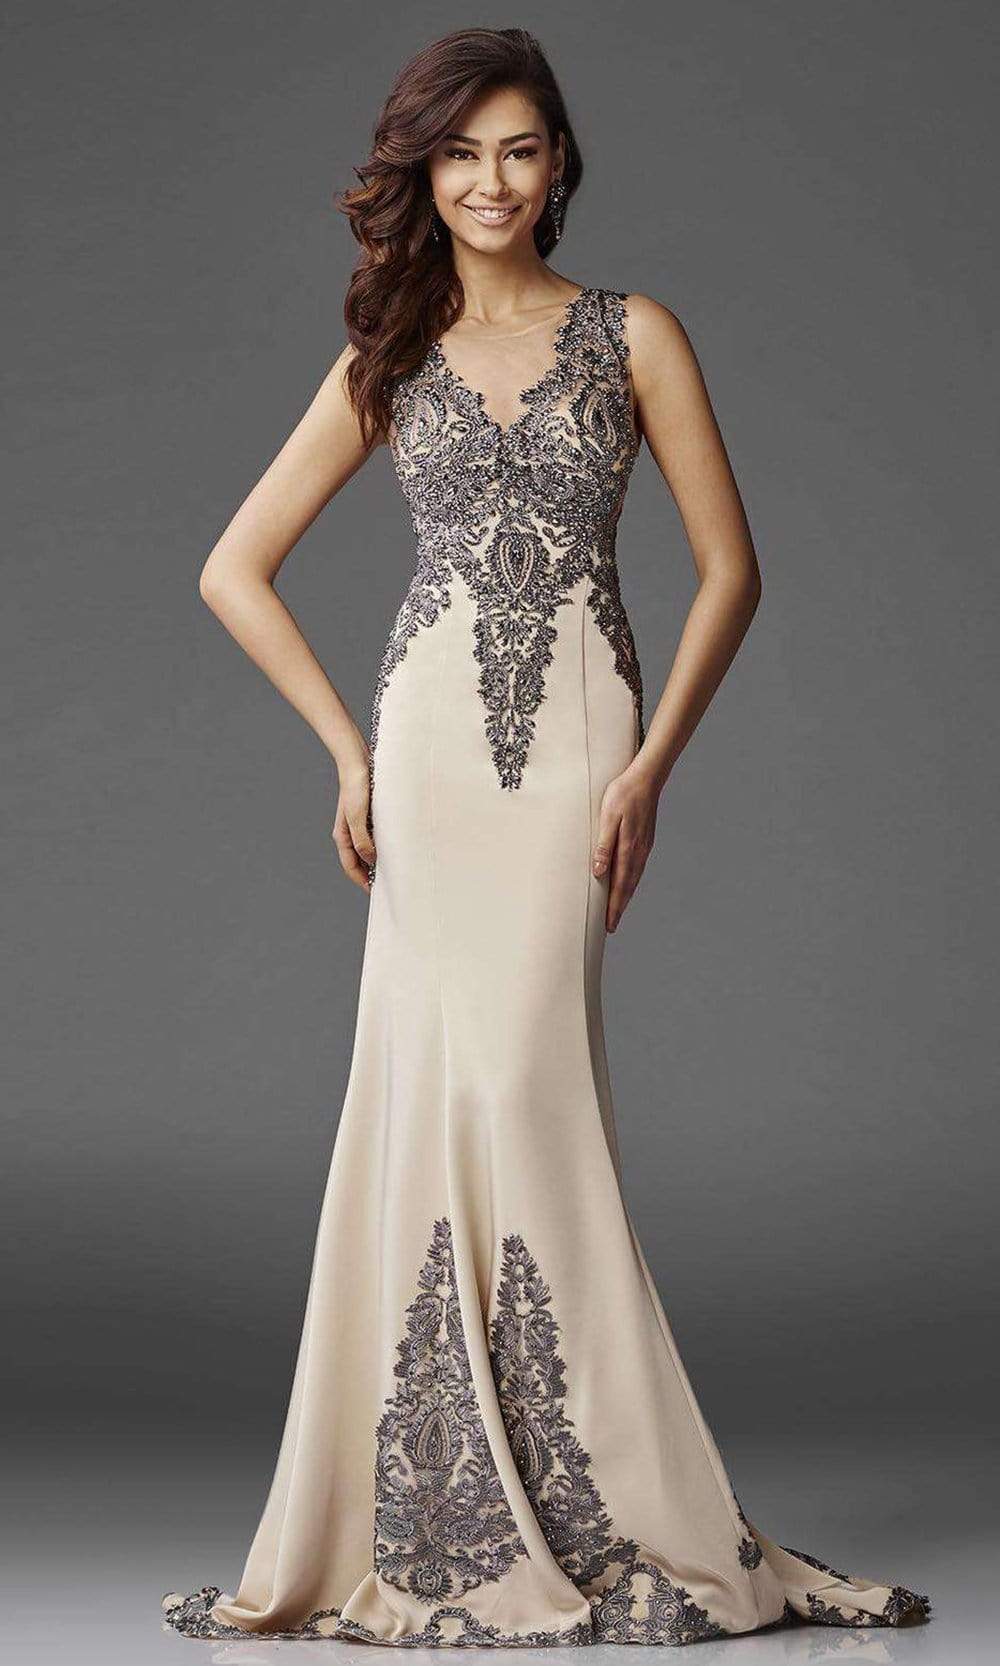 Clarisse - M6419 Intricate Embellished Lace Sheath Gown Special Occasion Dress 10 / Champagne